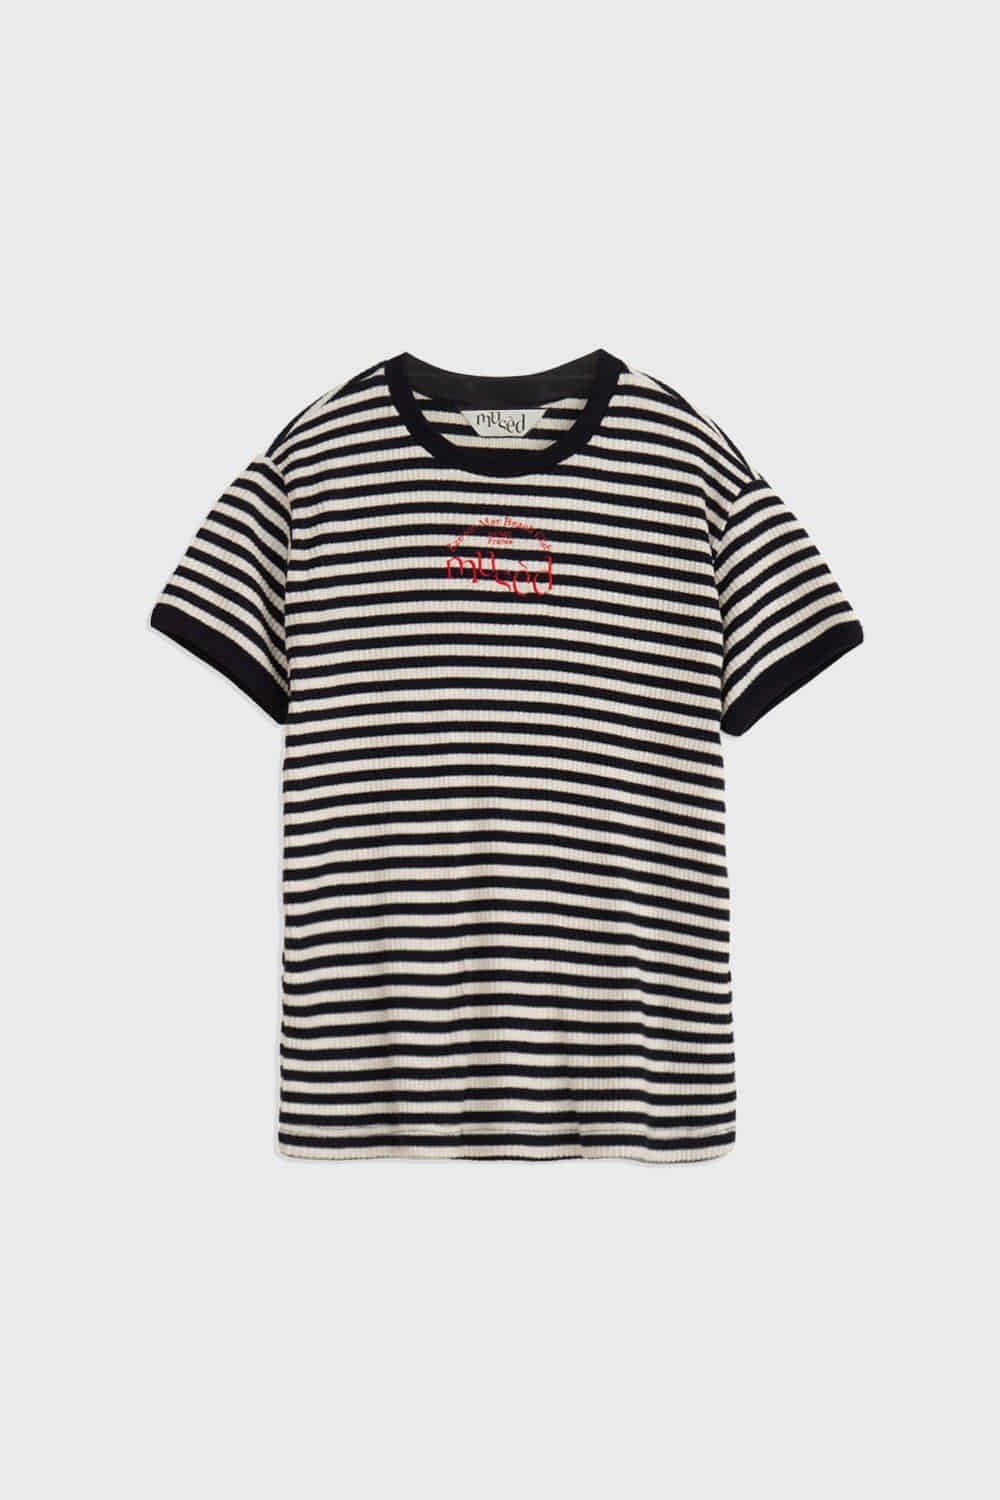 CONTRAST RIB PATCHED T-SHIRT -NAVY STRIPE